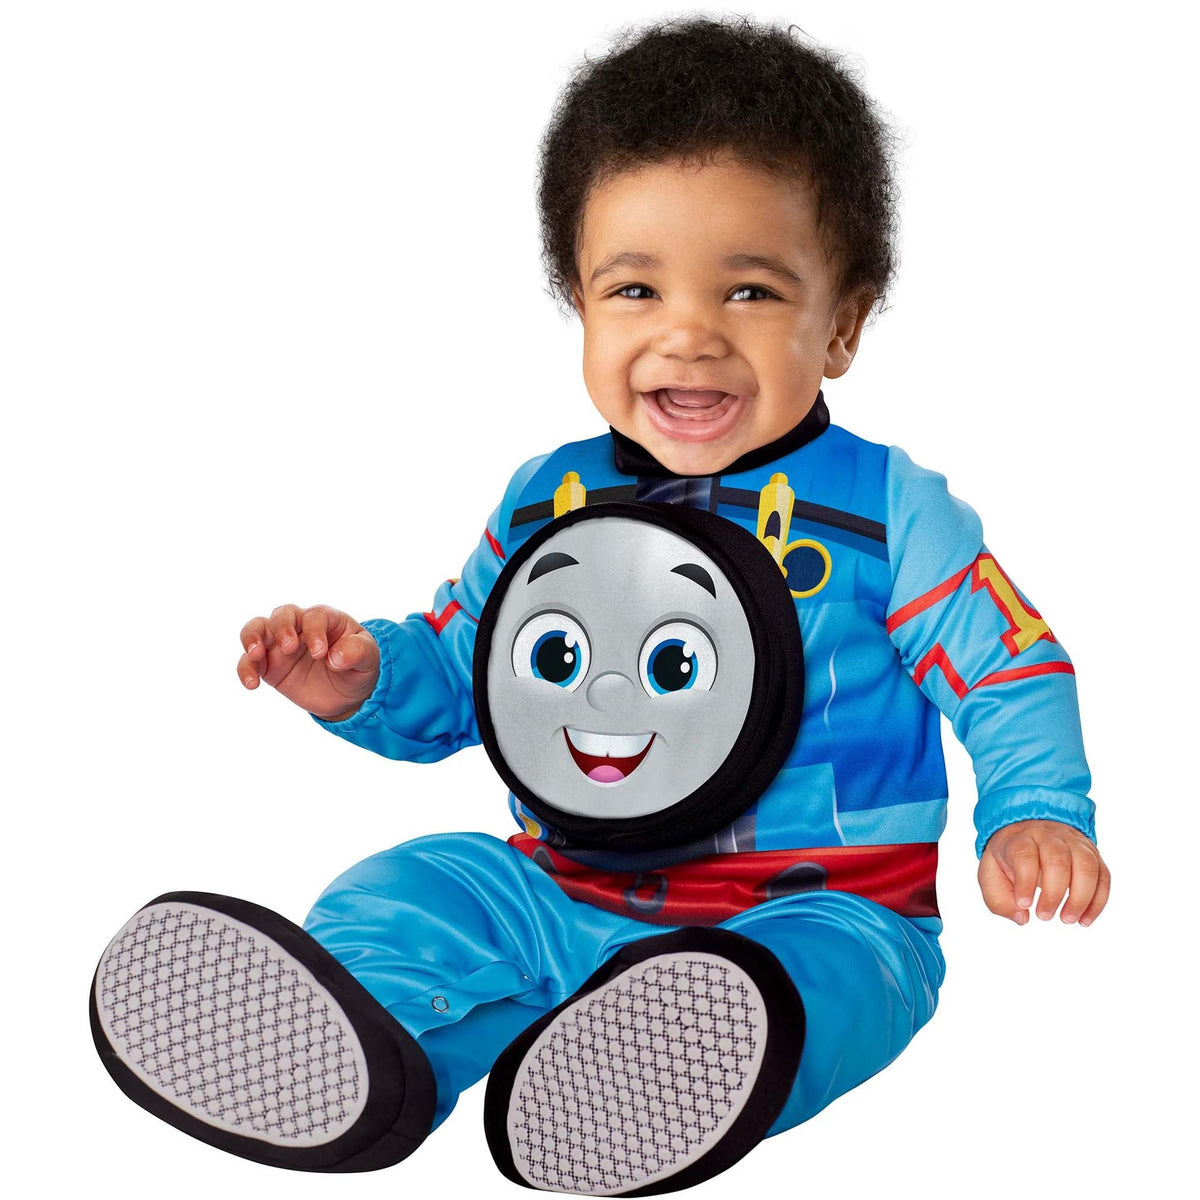 IN SPIRIT DESIGNS Costumes Thomas the Tank Engine Costume for Babies, Blue Jumpsuit